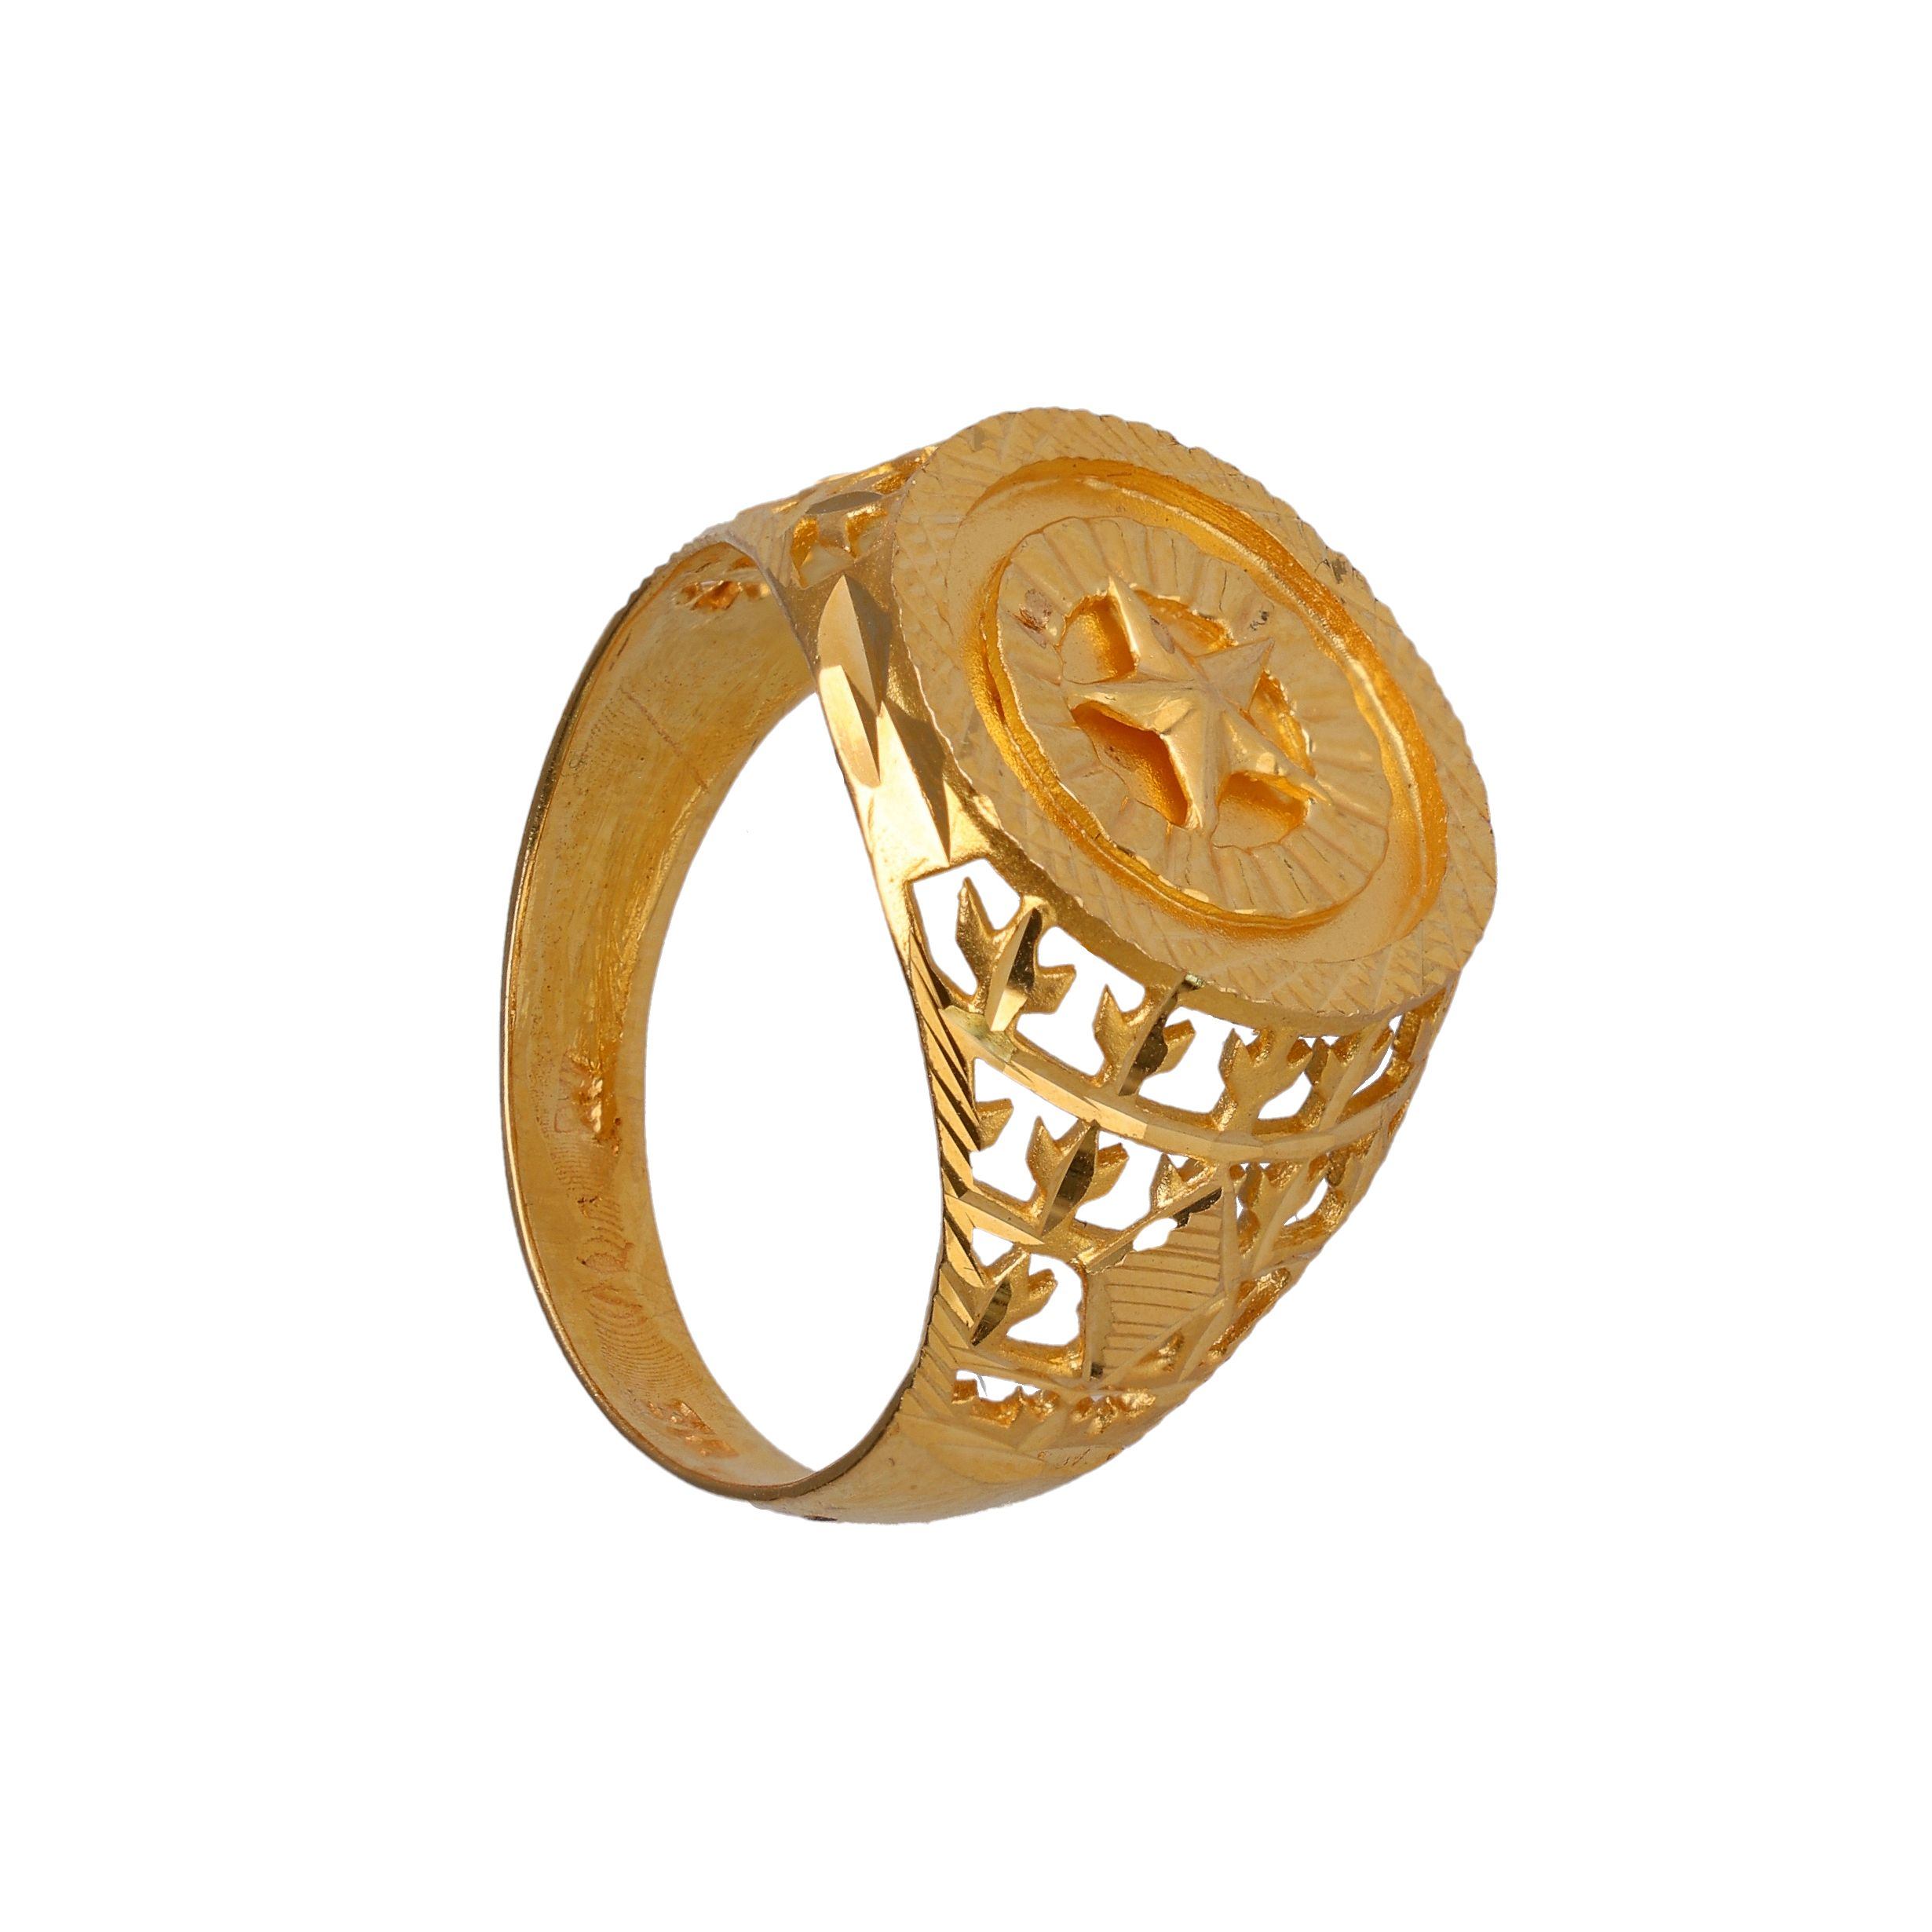 22 Karat Gold Band - RiWb27360 - US$ 845 - 22Kt Gold Band is designed with  shine finish and laser cut work which adds beauty to it.